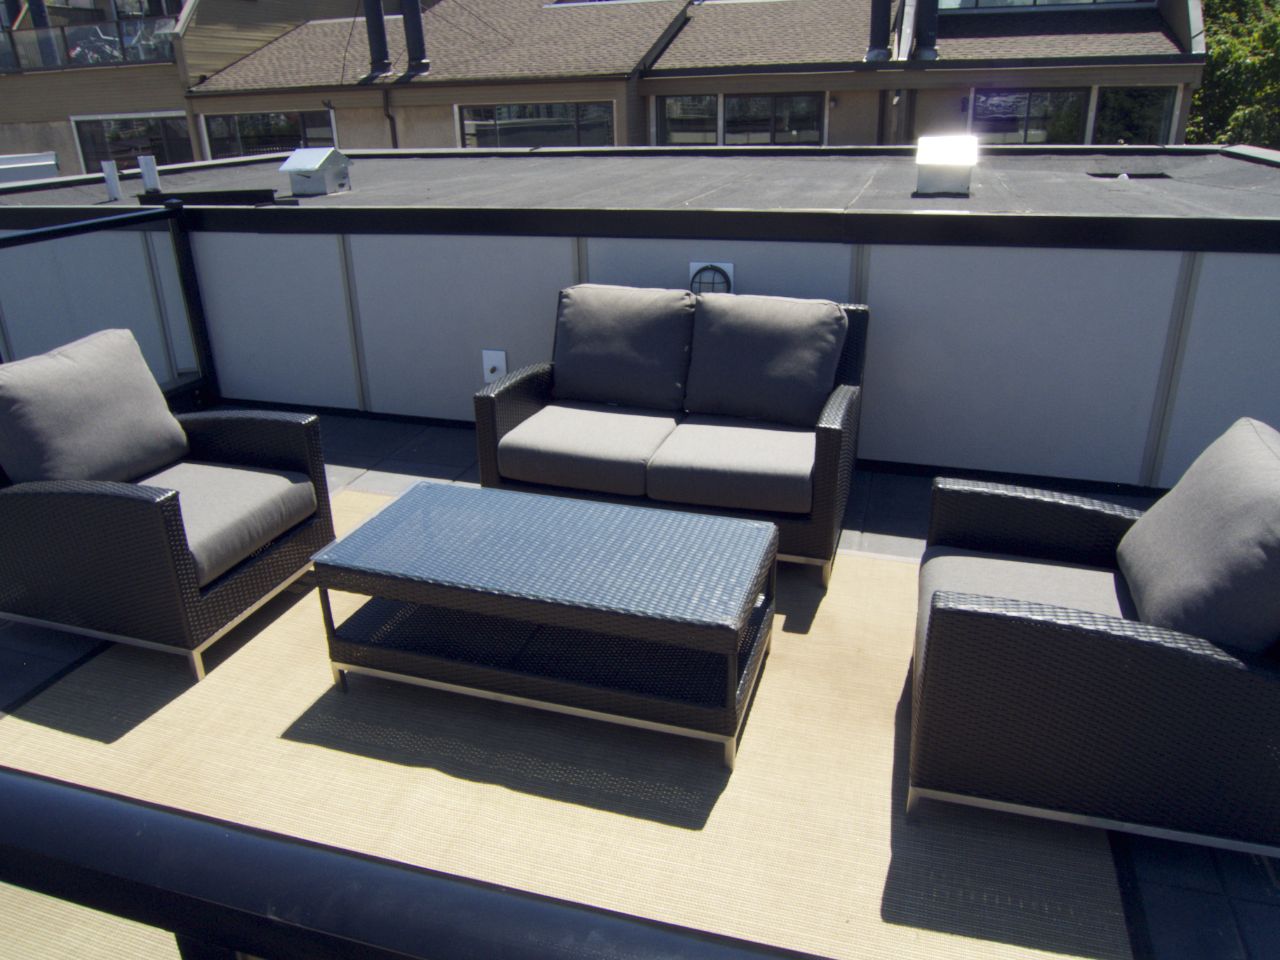 Roof top leisure space